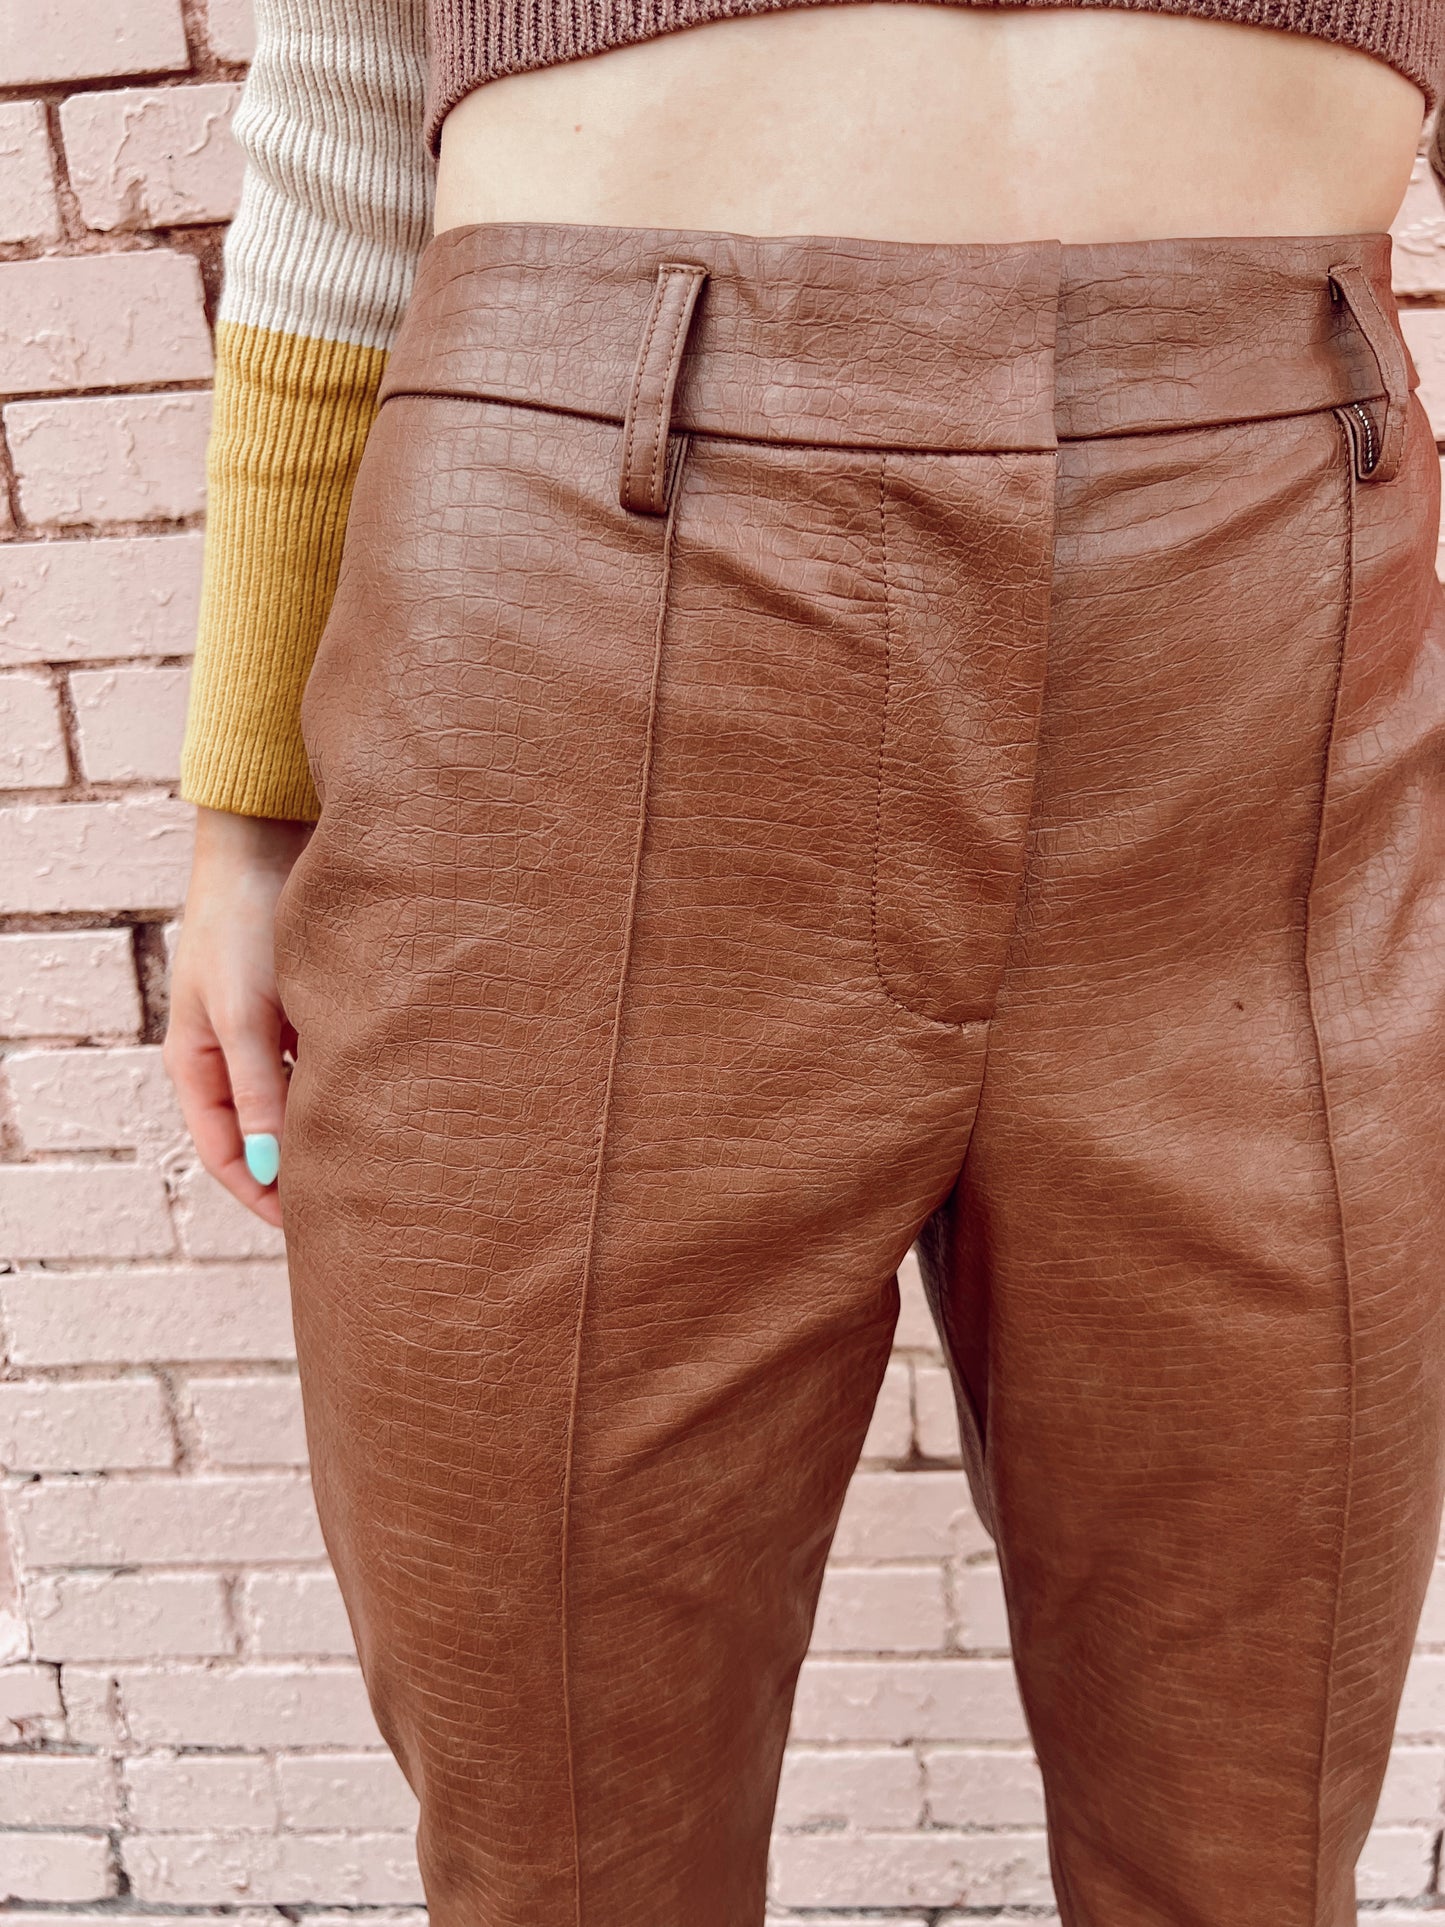 The Always Edgy Snake Print Leather Pants - Brown